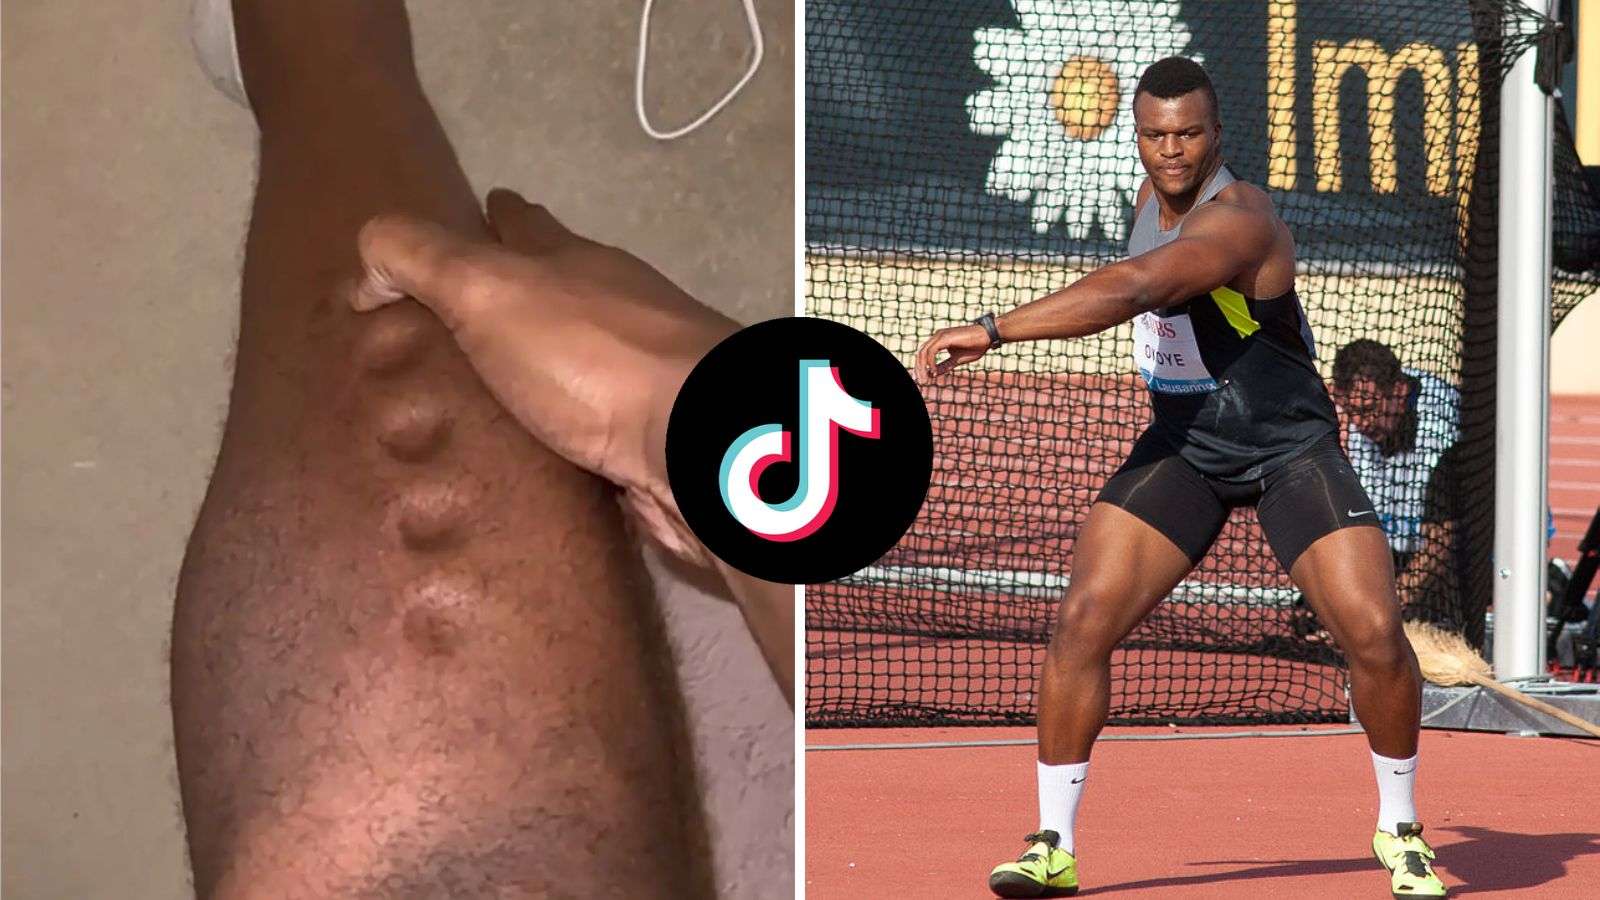 Olympian goes viral showing his “Play-Doh” legs caused by deadly infection